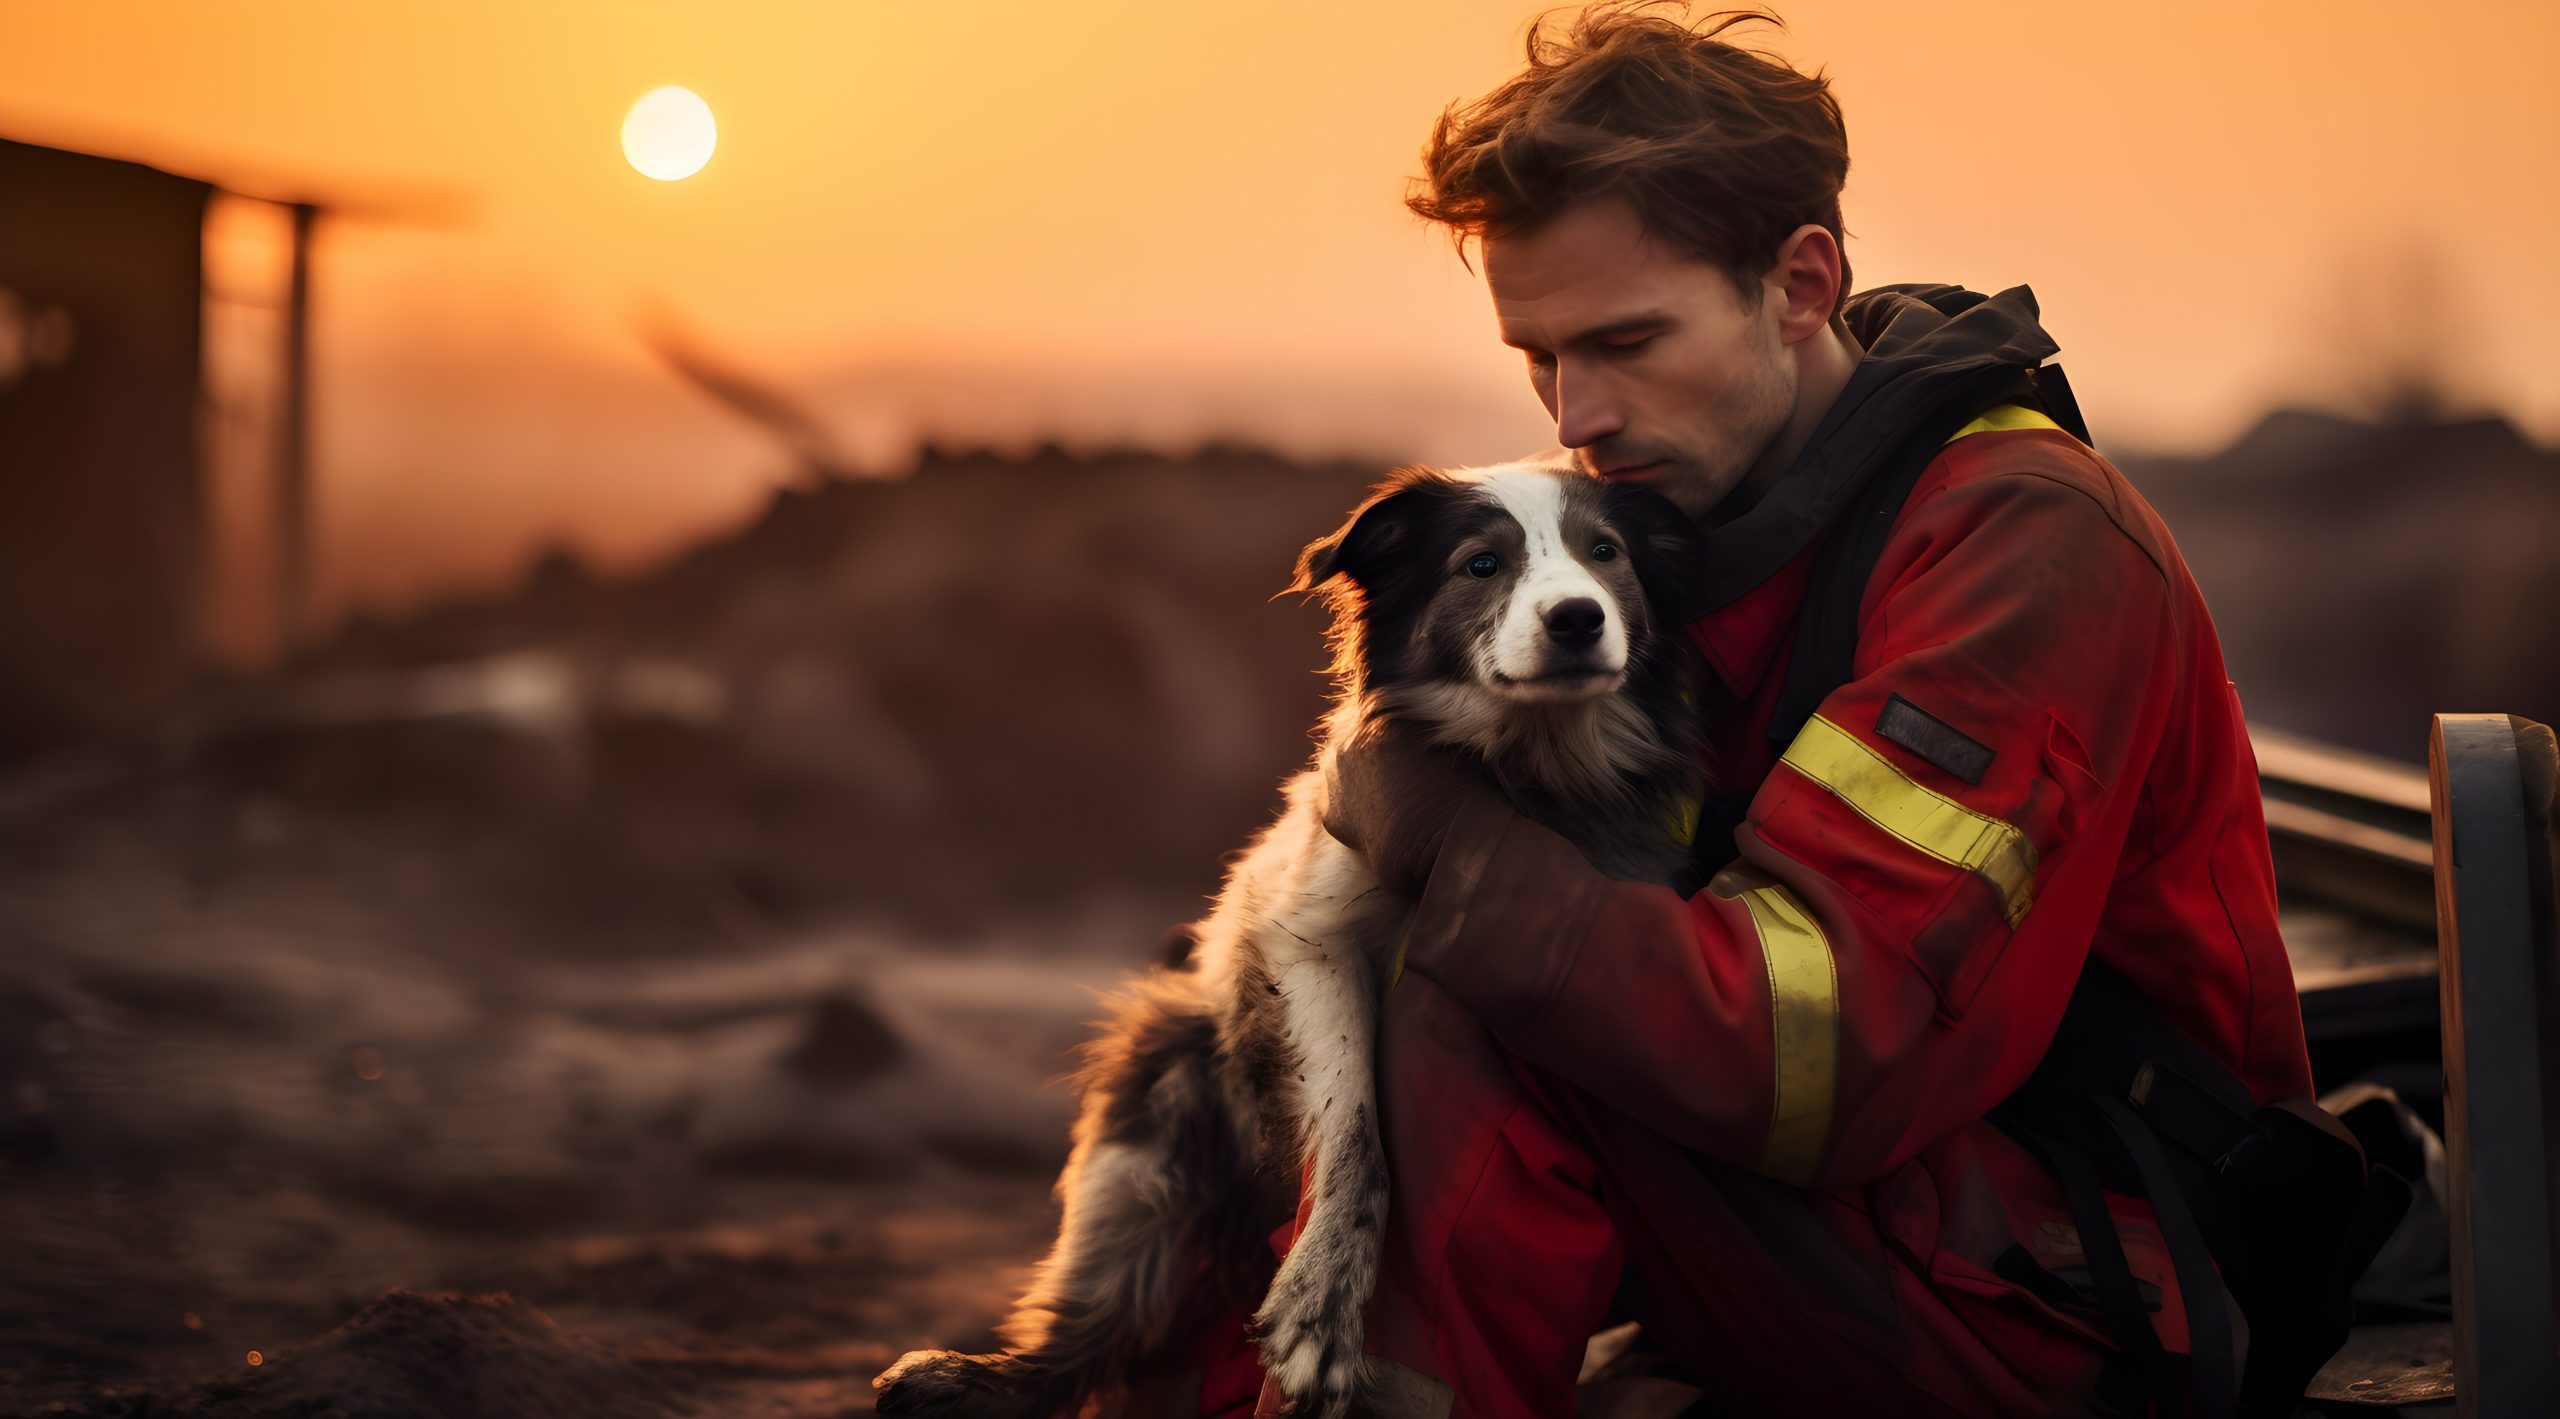 Tips for Keeping your Pet Safe in an Emergency